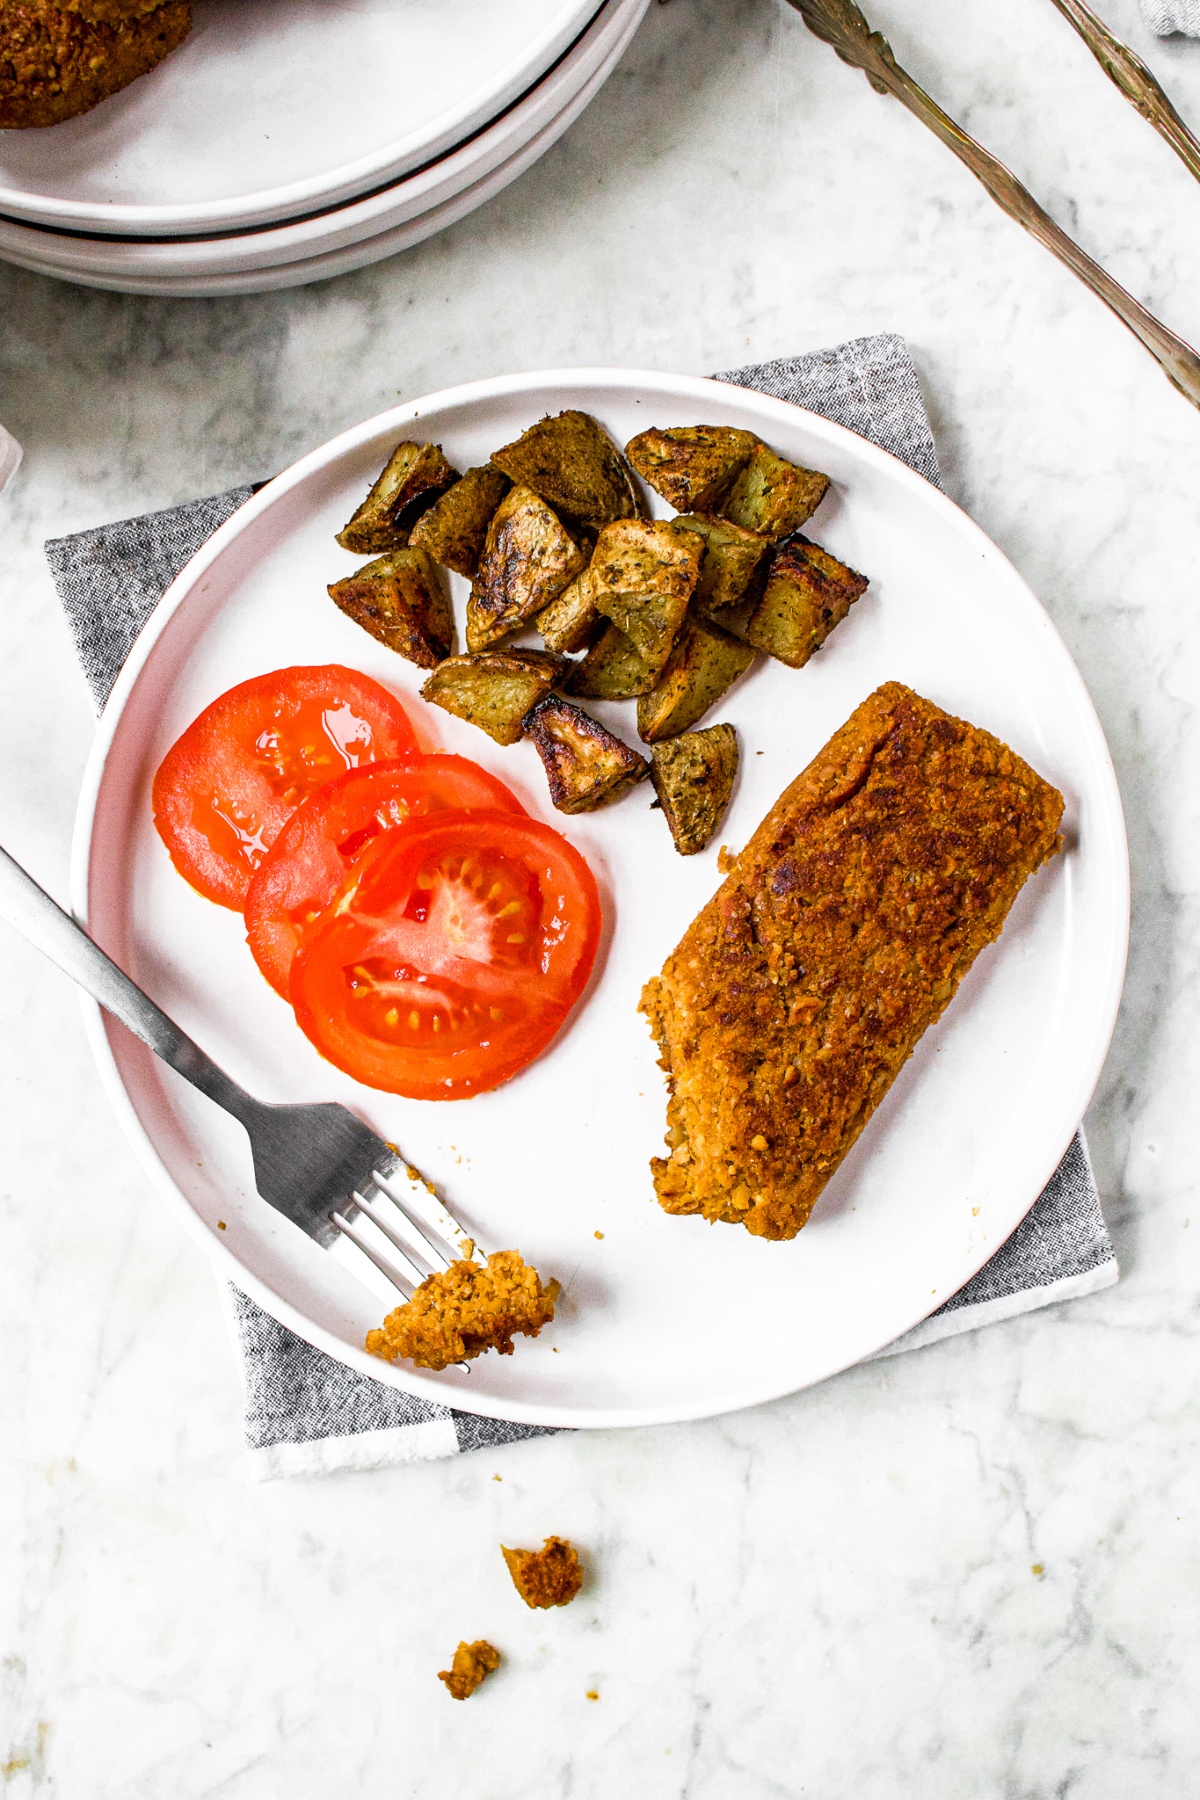 Overhead shot of a round white plate on a black and white plaid linen with a sliced tomato, roasted potatoes, and vegan scrapple made from walnuts on it. A fork is leaning on the plate with a piece of the vegetarian scrapple on it.